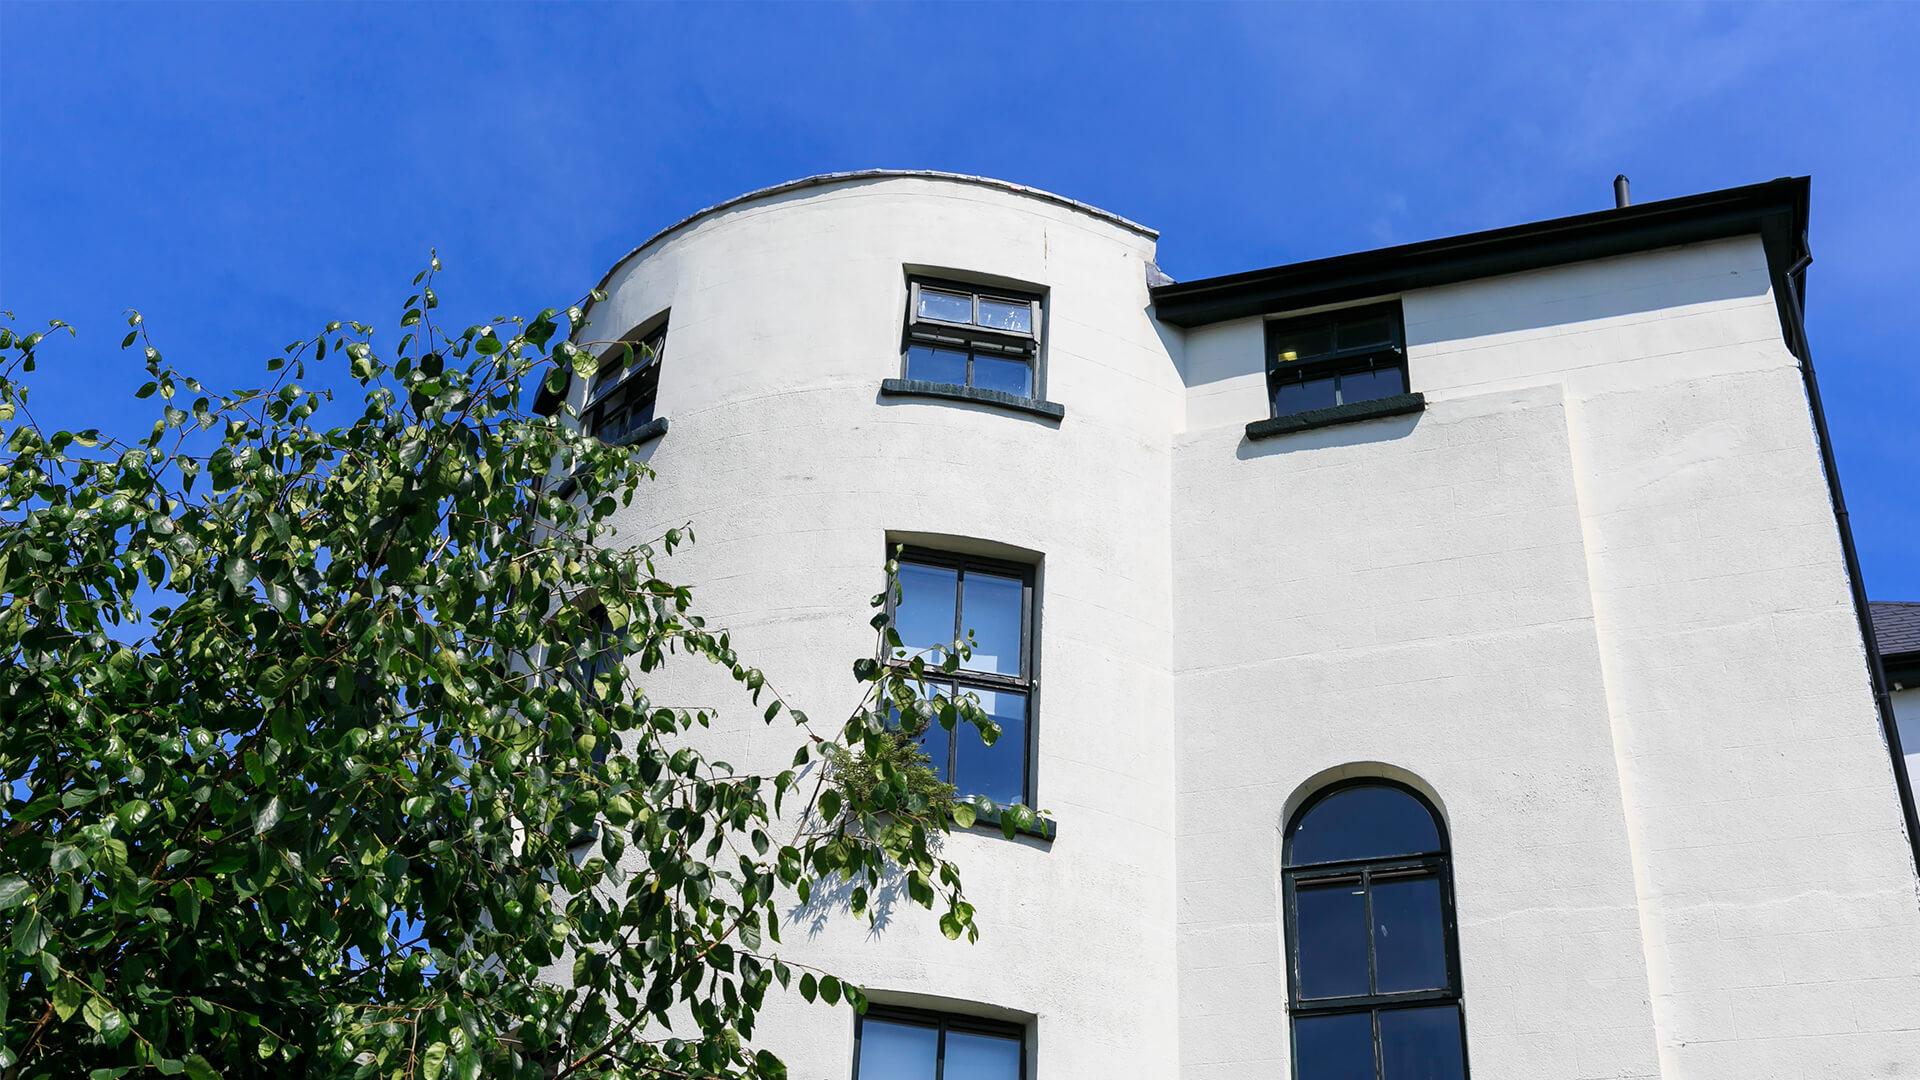 The white rendered exterior of Townhouse Twenty2 with its distinctive curve and large windows